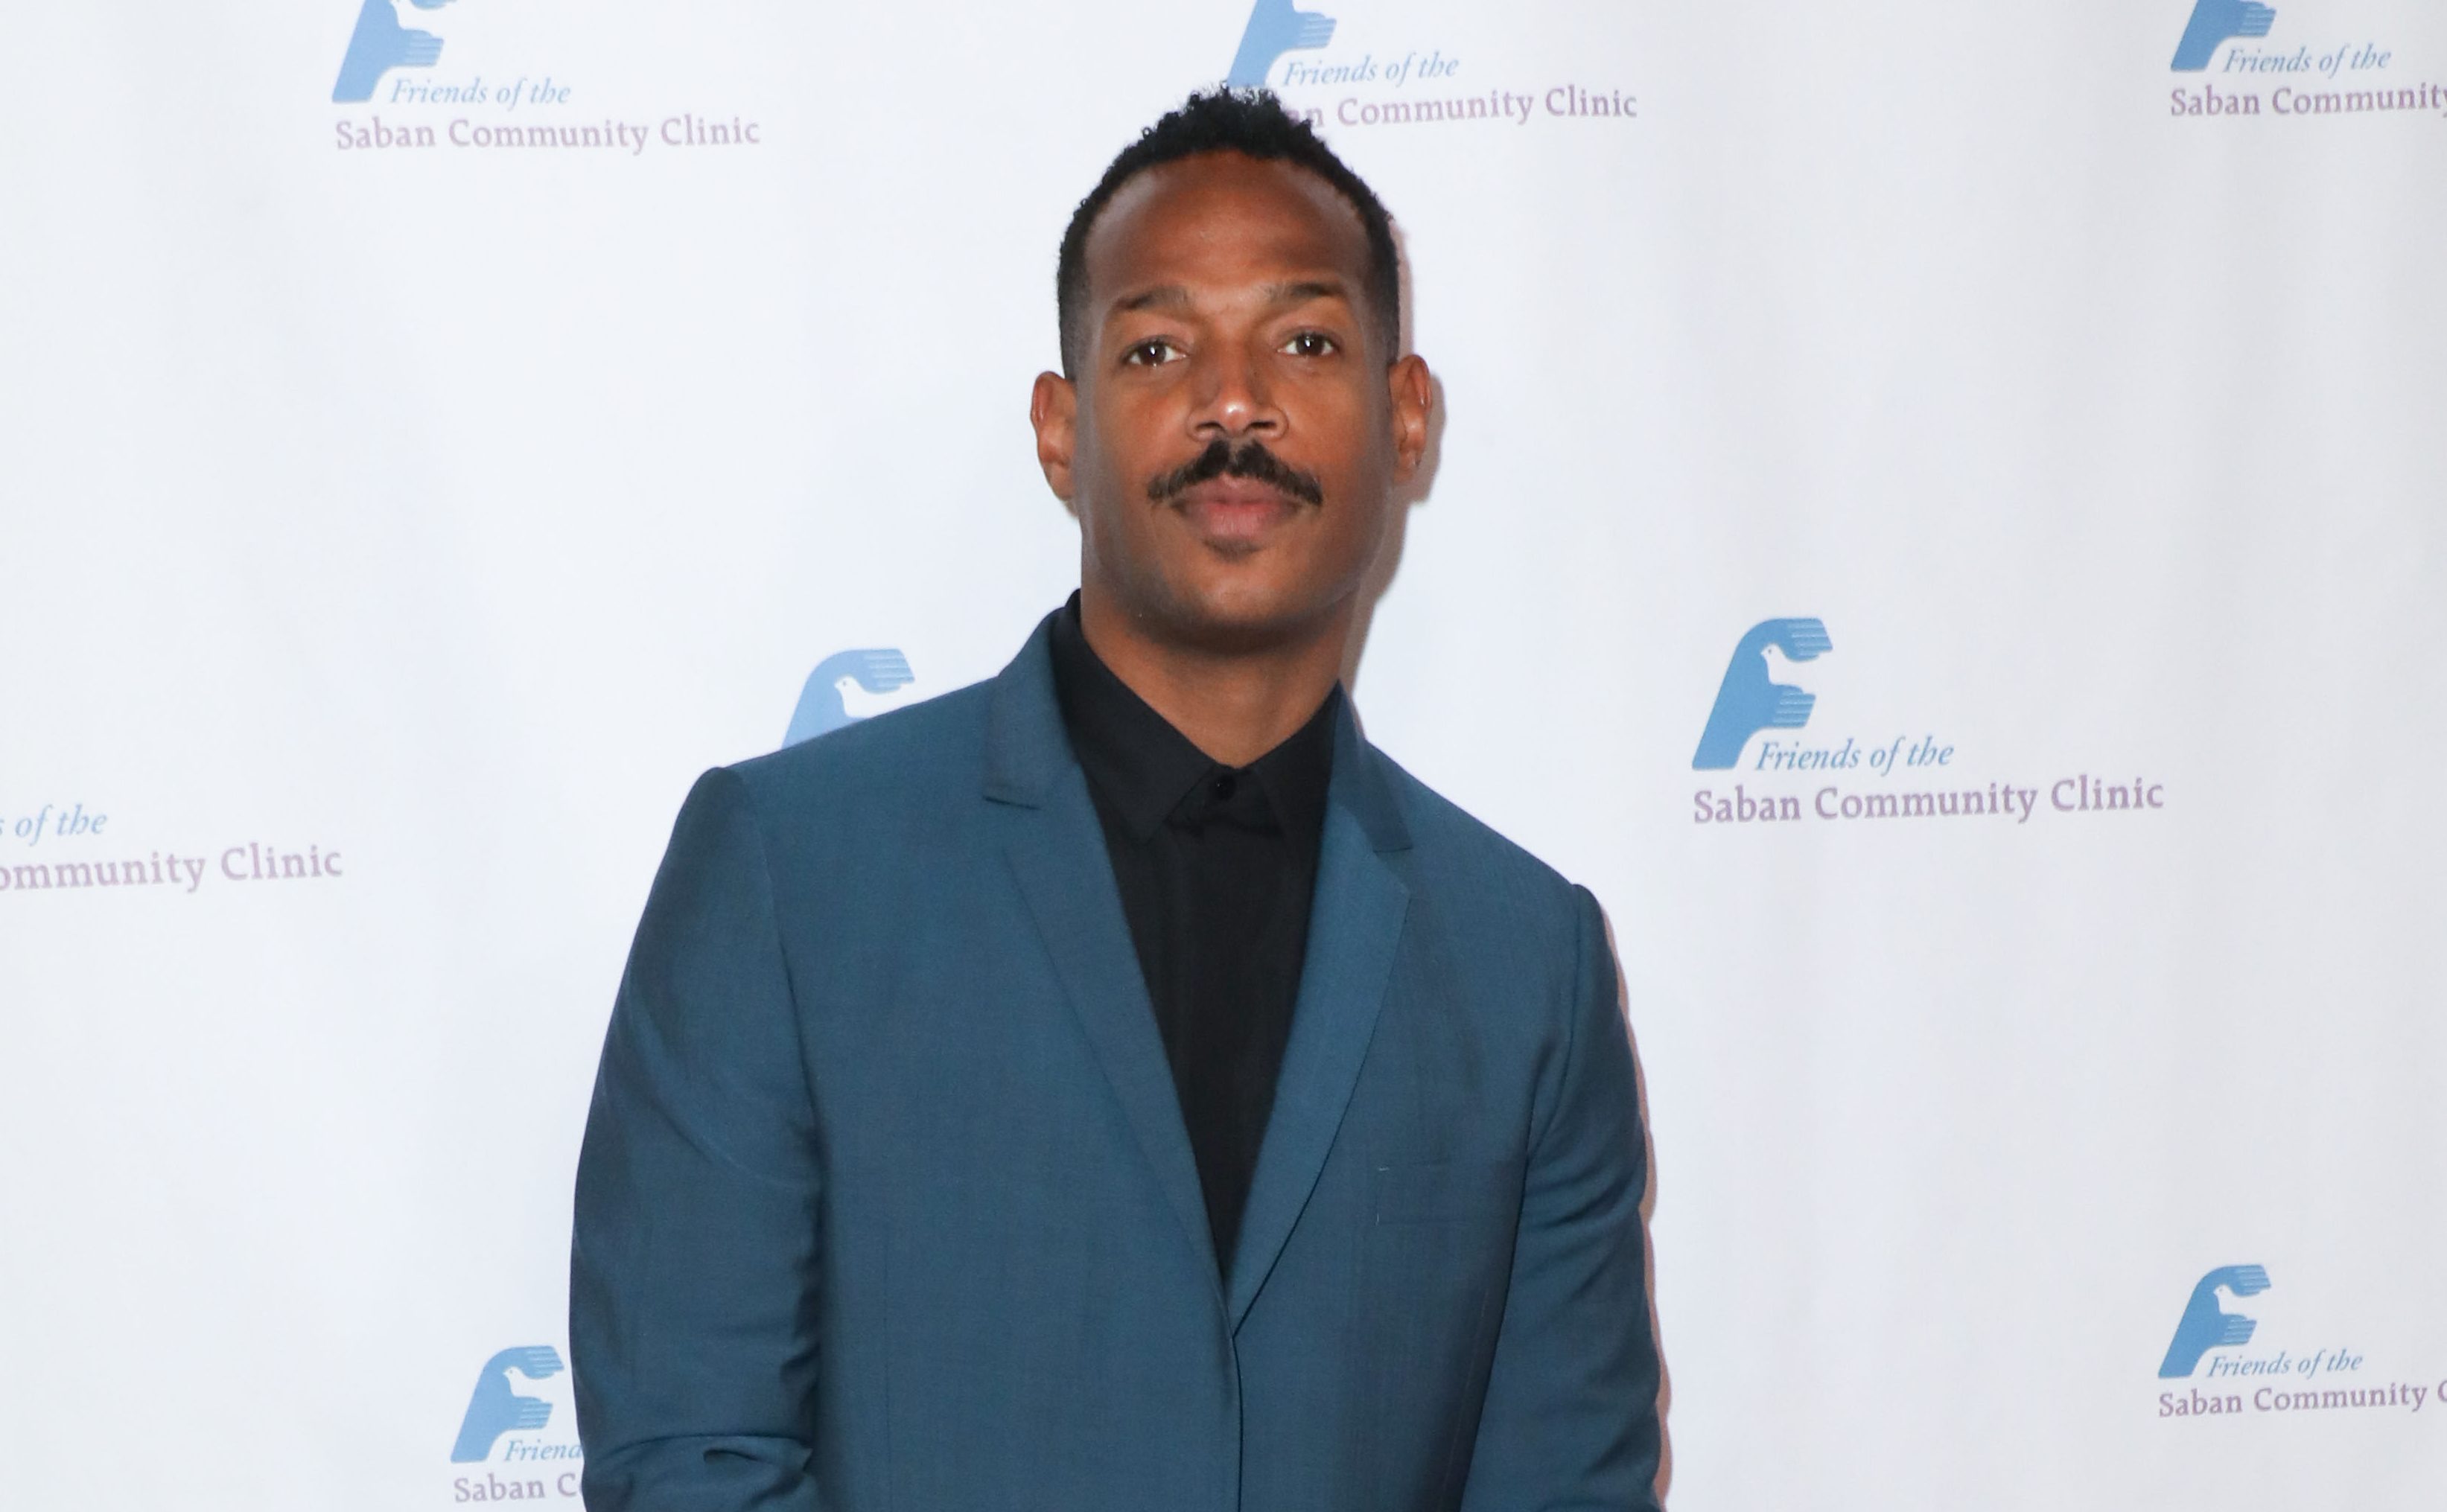 Marlon Wayans arrives at the Saban Community Clinic&apos;s 43rd Annual Dinner Gala held at The Beverly Hilton Hotel on November 18, 2019 in Beverly Hills, Los Angeles, California, United States. (Photo by Image Press Agency)